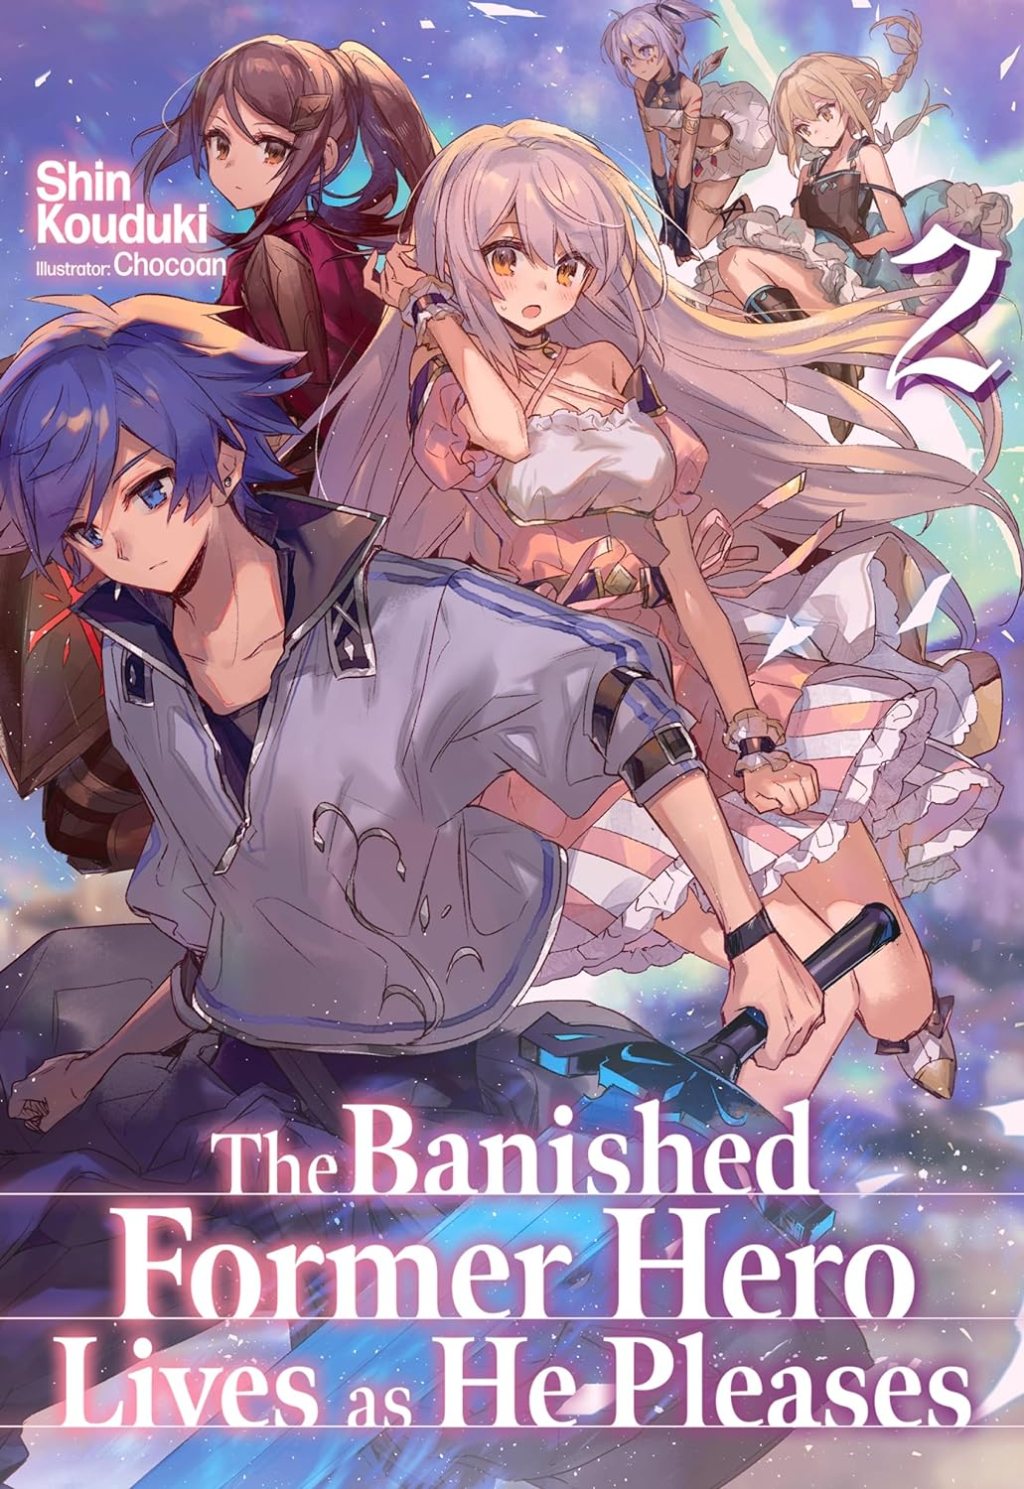 The Banished Former Hero Lives as He Pleases Vol. 2 Review